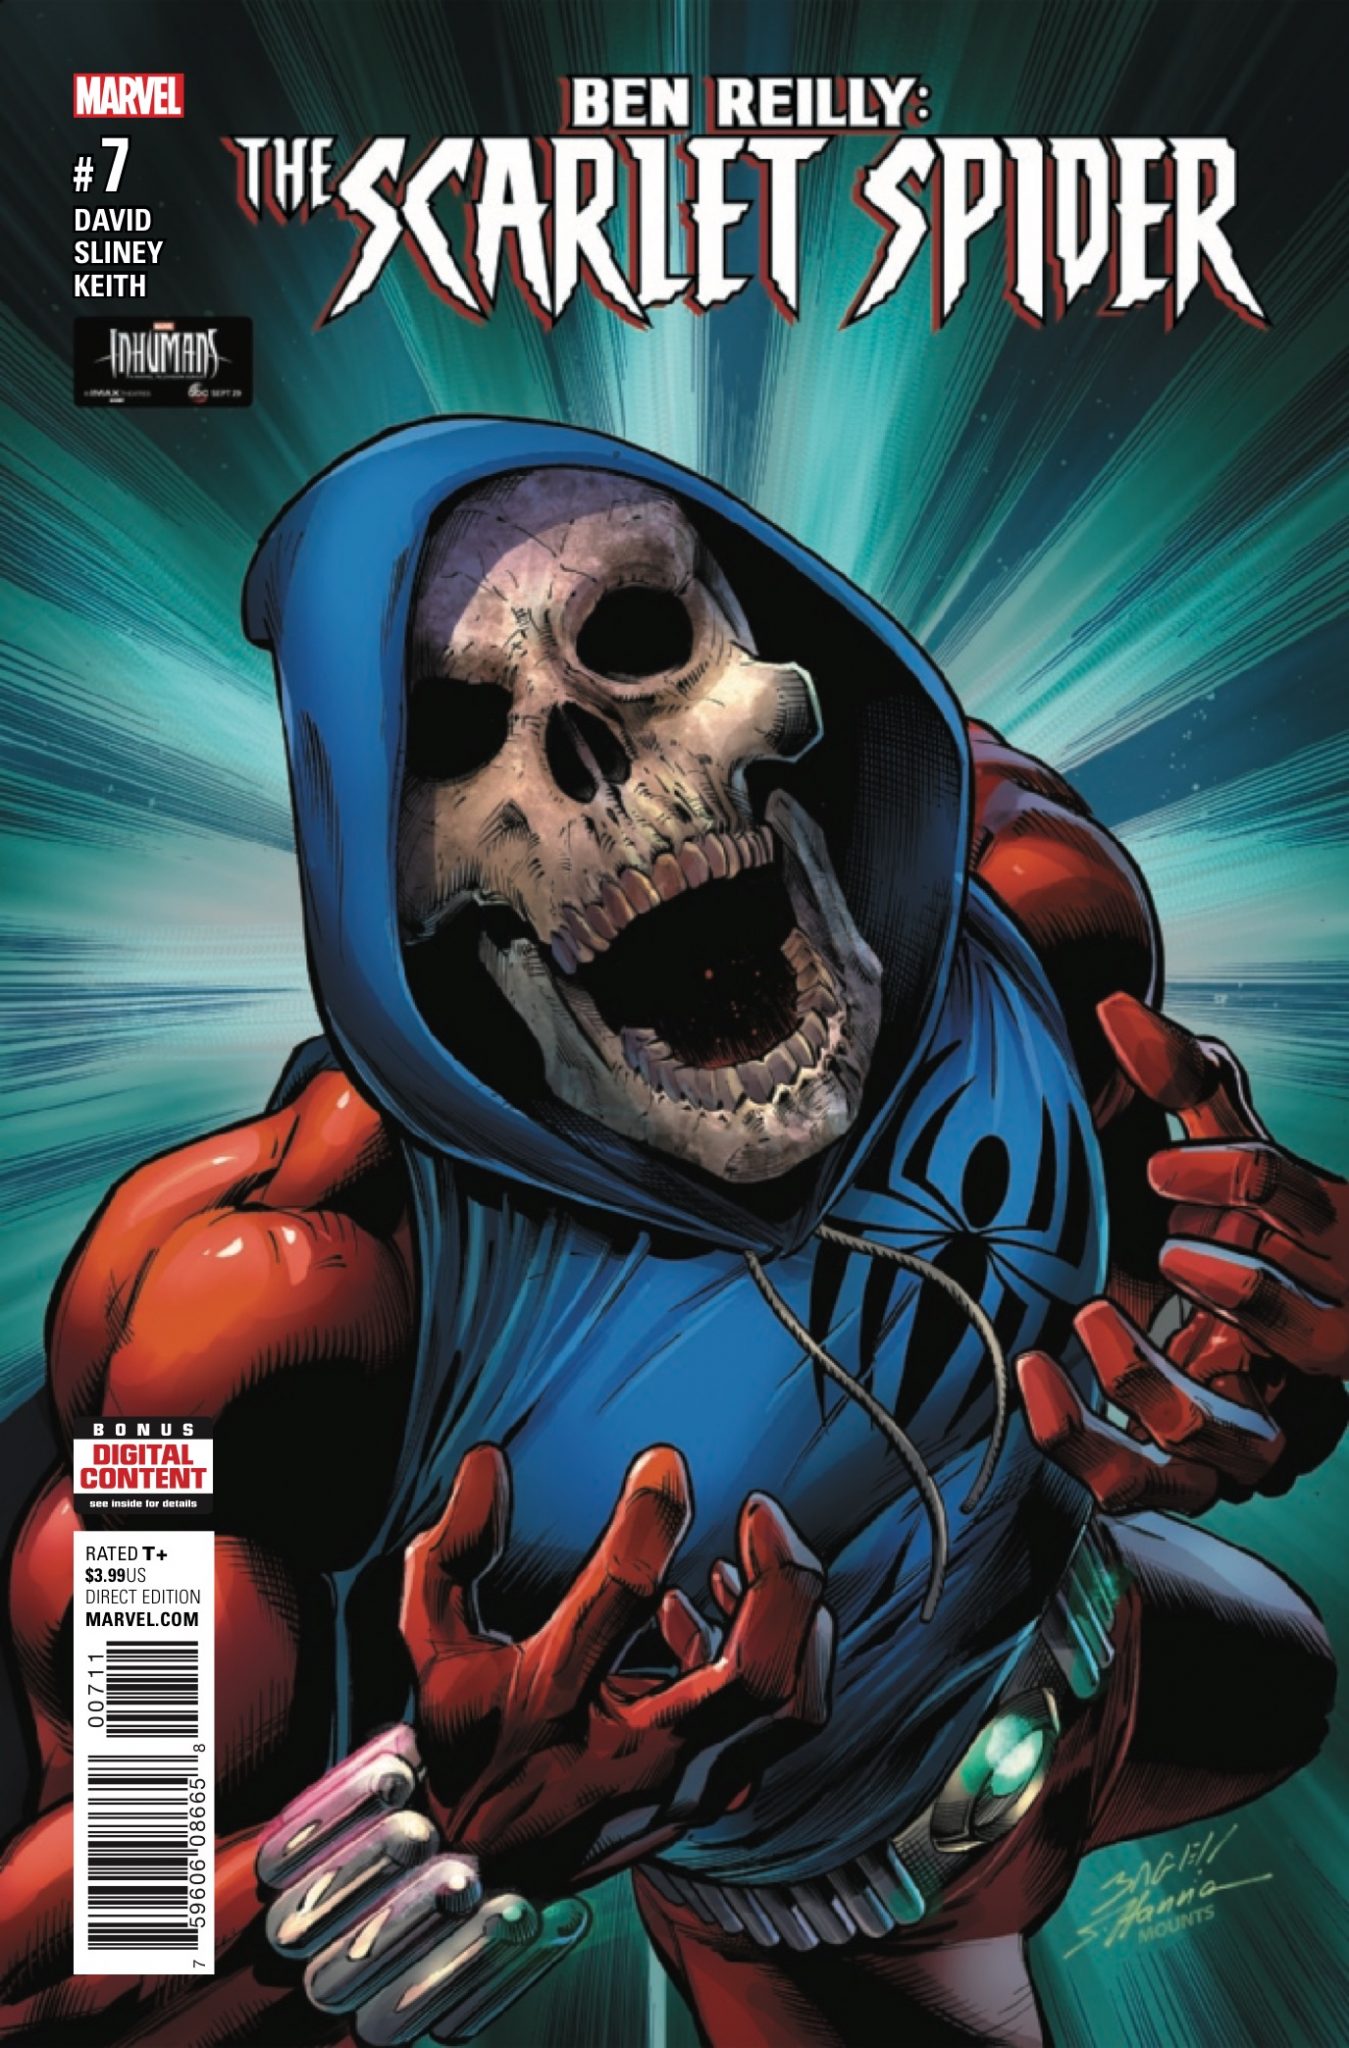 Marvel Preview: Ben Reilly: The Scarlet Spider #7